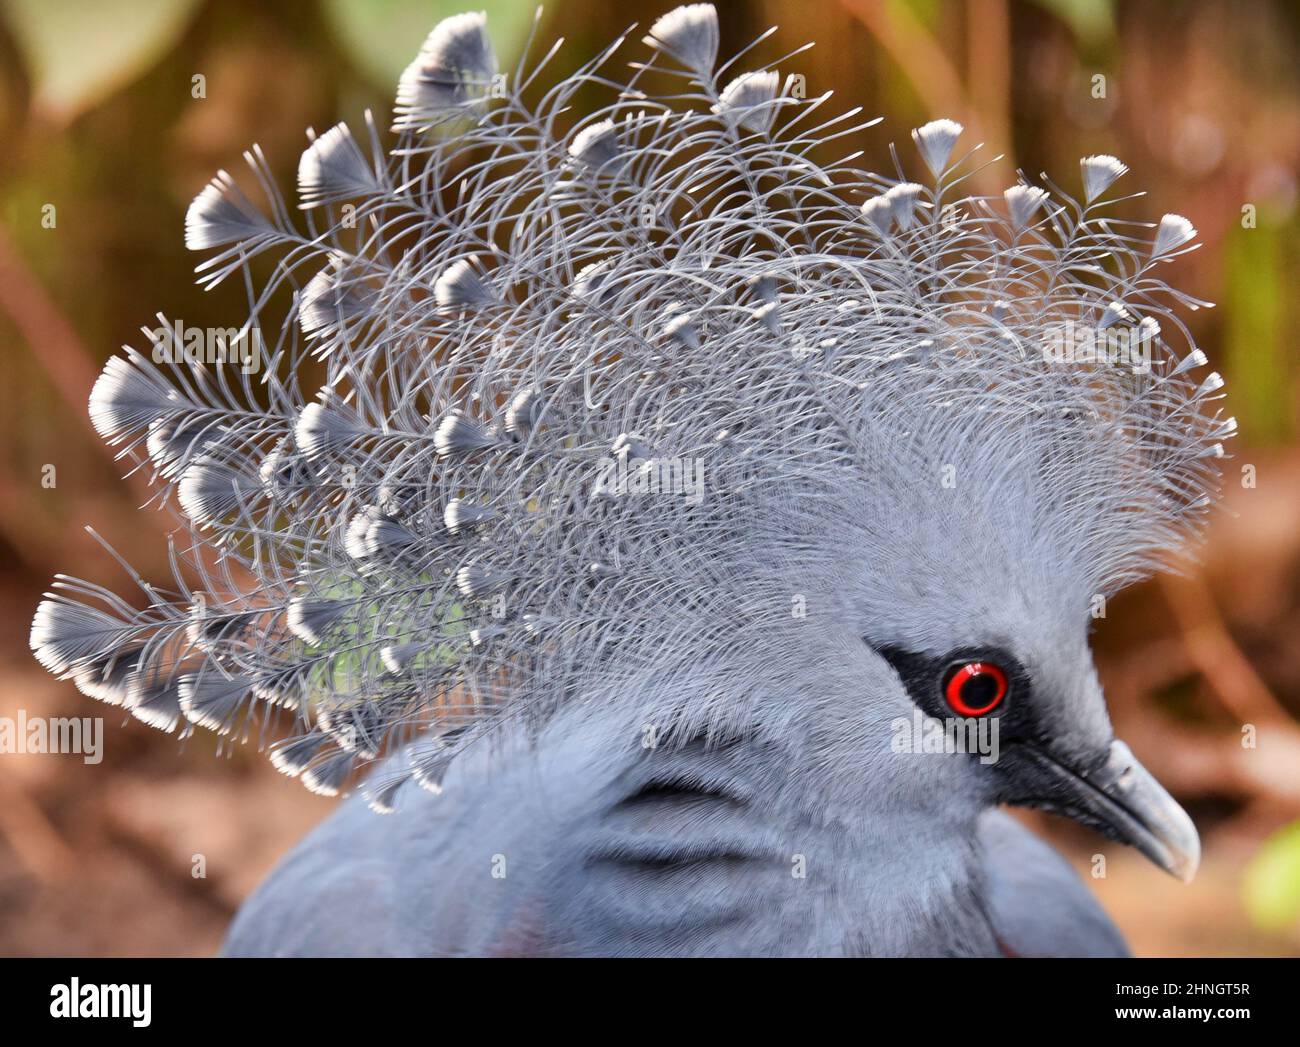 16 February 2022, Saxony, Leipzig: A fantail pigeon, also known as a Victoria crowned pigeon, shows off its striking fantail comb in the zoo's Gondwanaland at a summery 25 degrees. Around 500 different plant species and 170 exotic animals can be seen in the facility, which features tropical rainforests of Africa, Asia and South America and opened 10 years ago. The zoological garden, laid out in a park-like manner on 26 hectares, is the most species-rich zoo in Europe and recently came second in the zoo ranking list in Europe, making it first in Germany. Photo: Waltraud Grubitzsch/dpa-Zentralbi Stock Photo